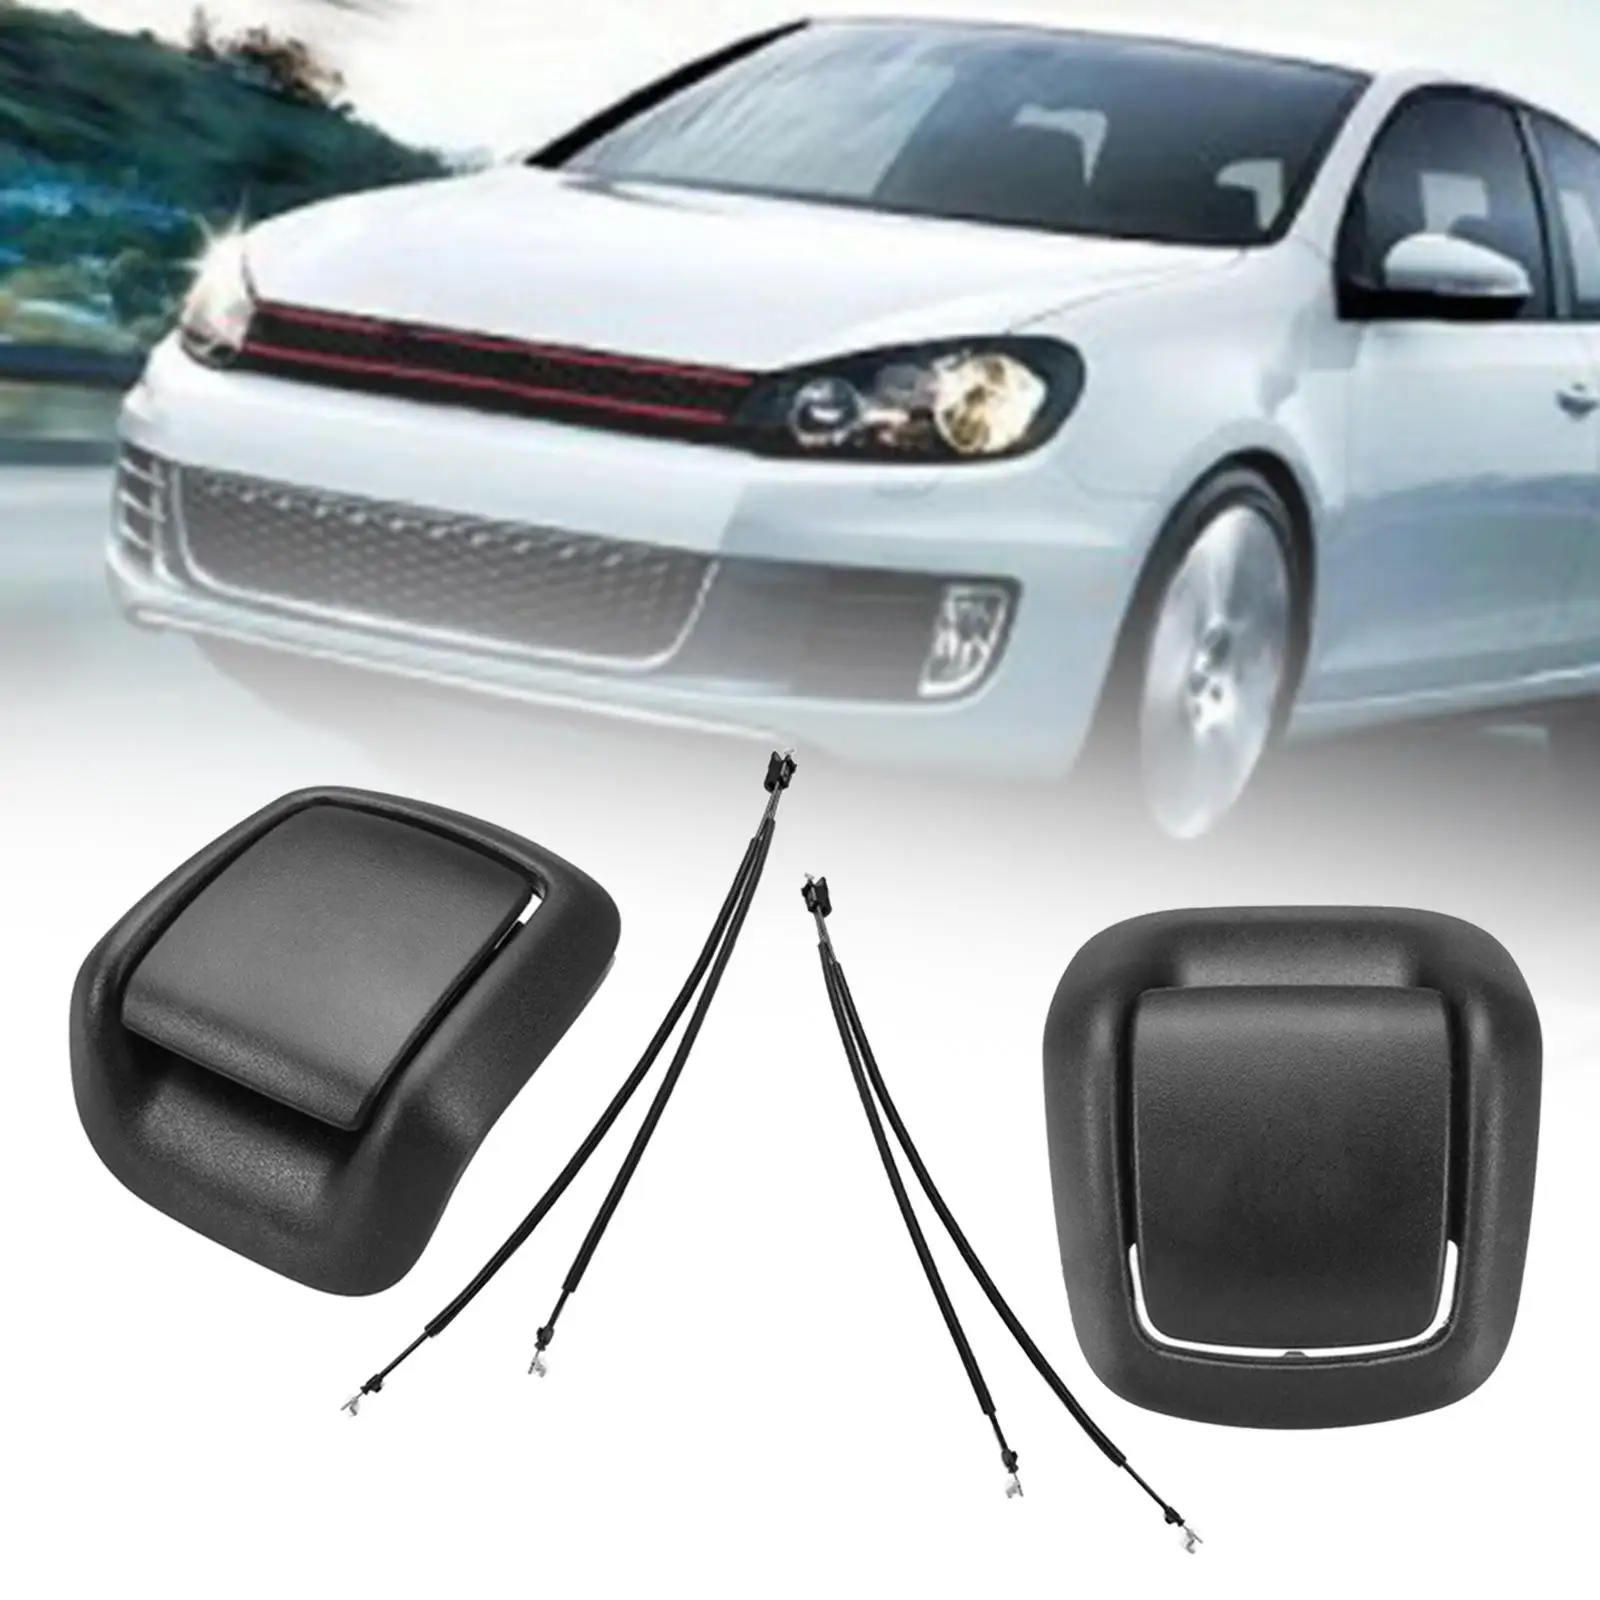 Durable Seat Tilt handle Cable Replaces Front Hand Vehicle for Fiesta MK6 3 Door Interior Accessory Assembly Repair